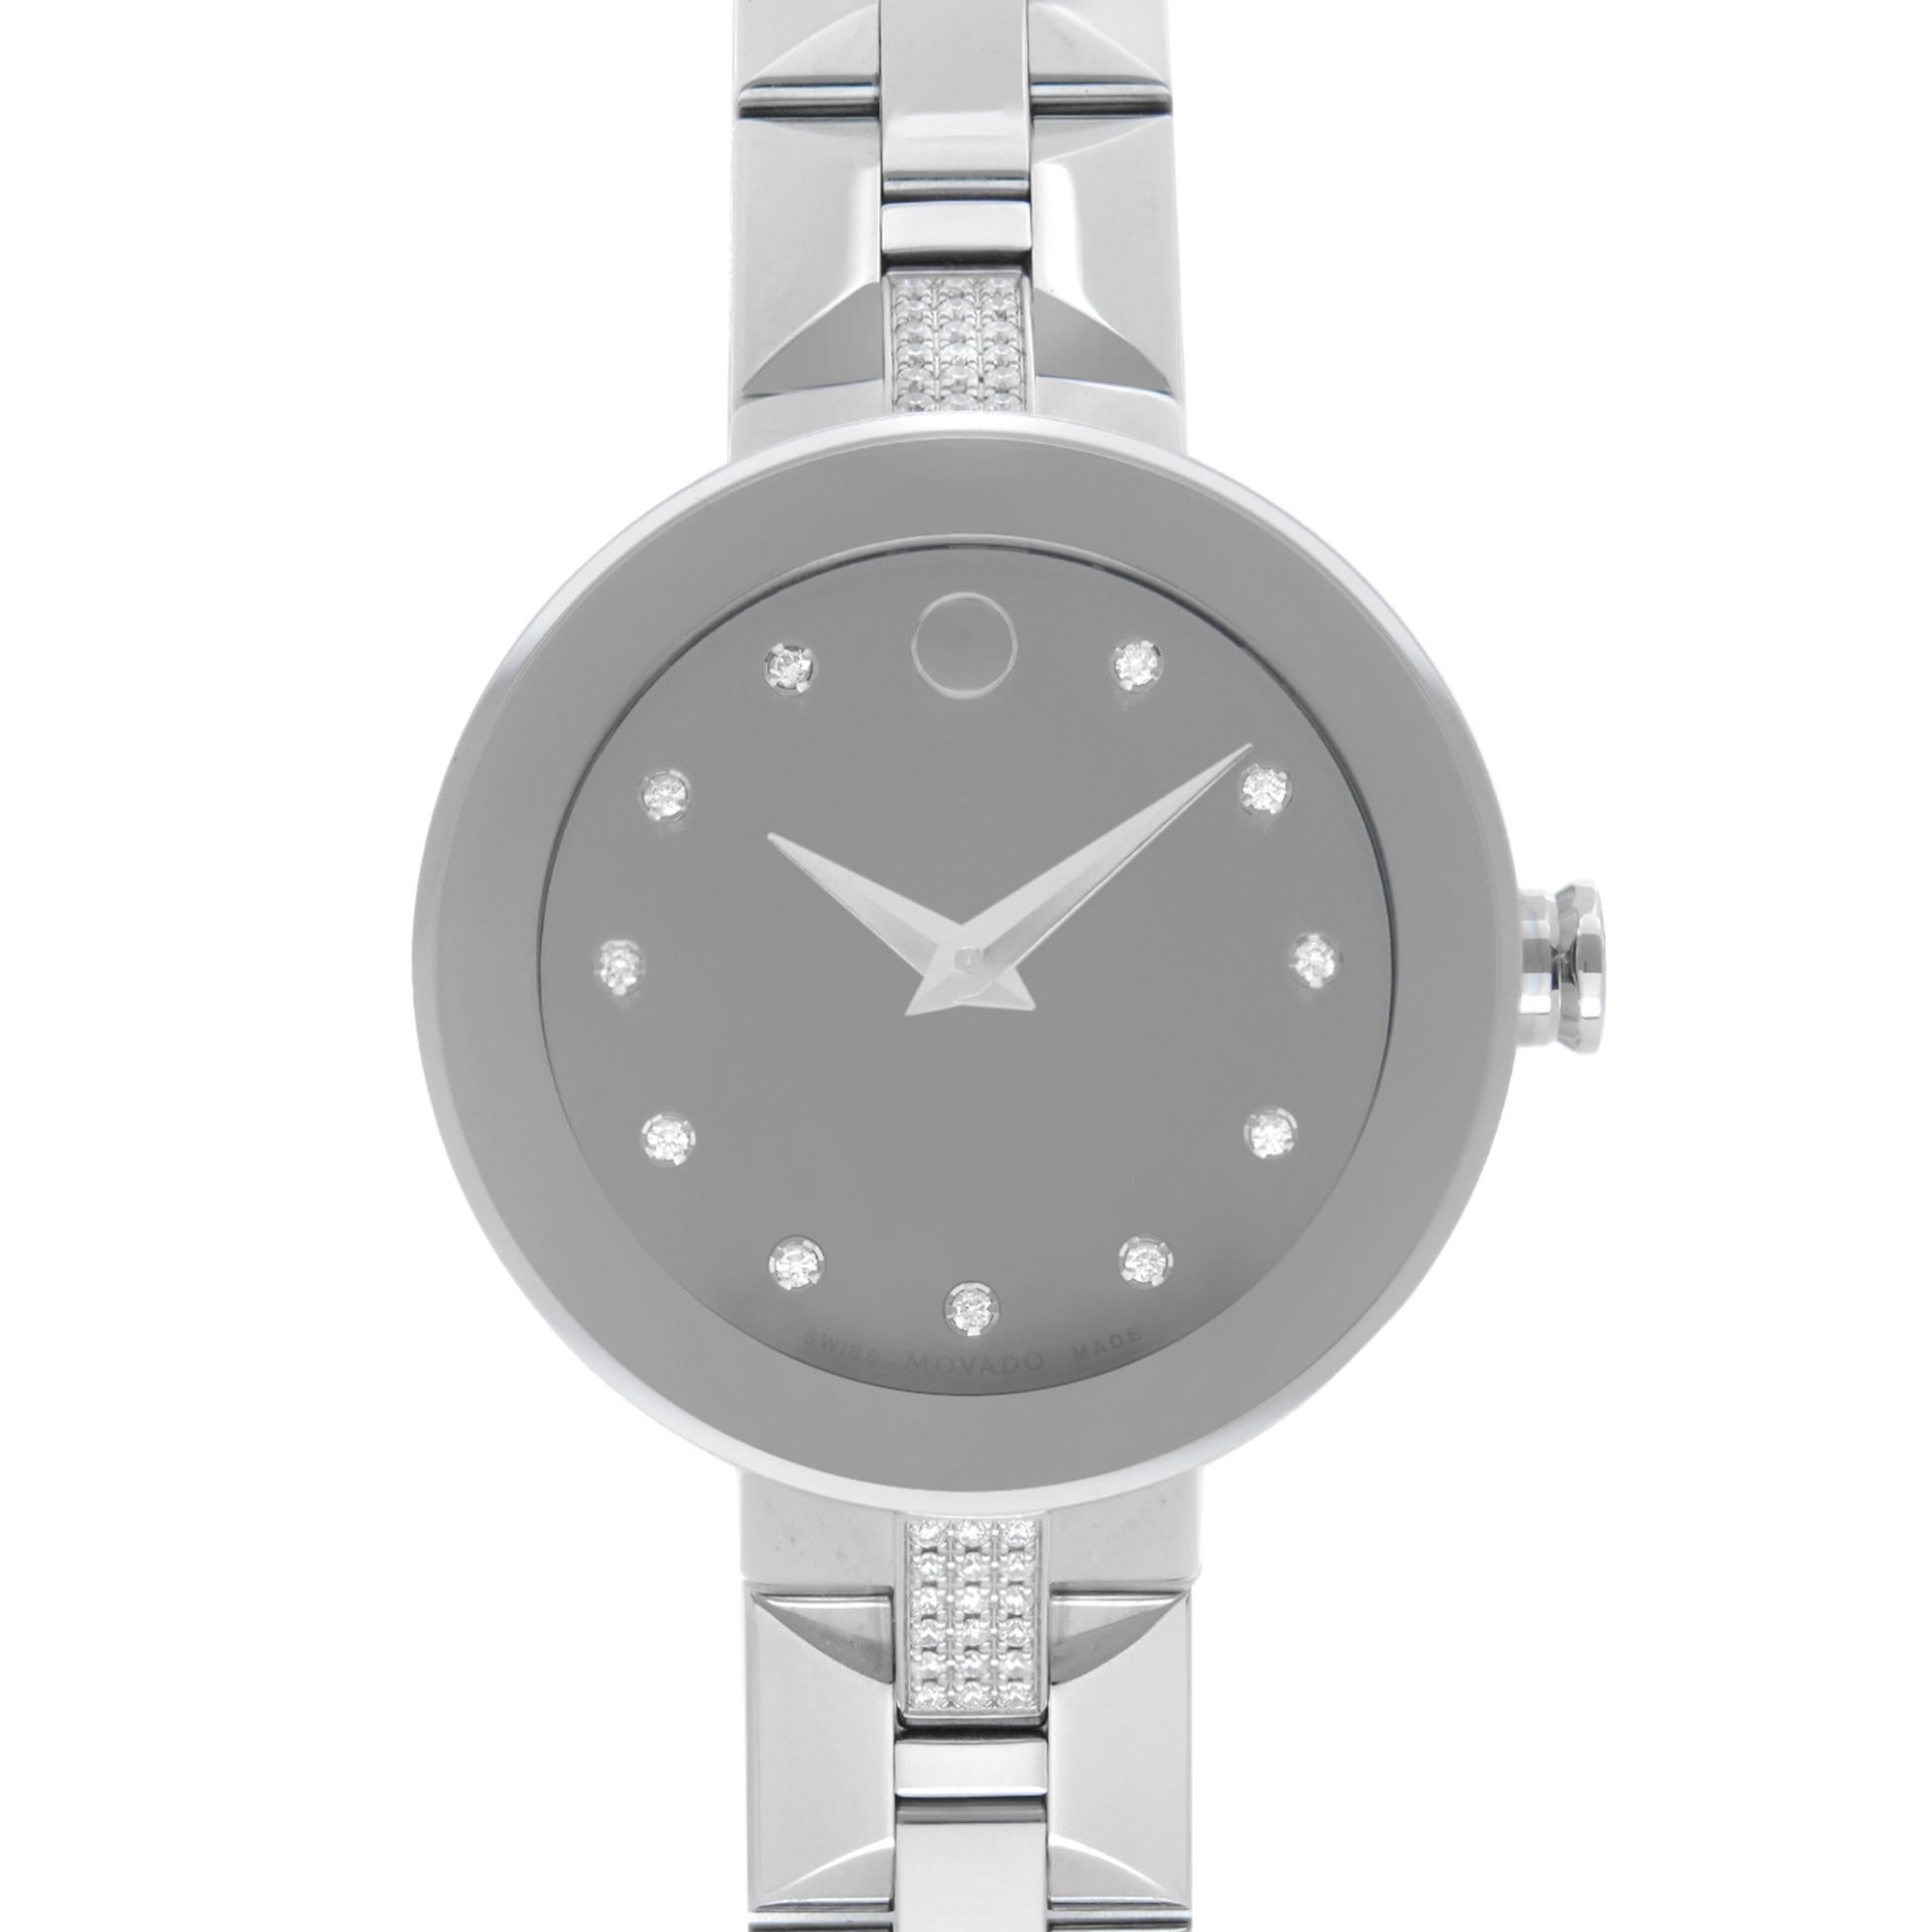 Display Model Movado Sapphire Steel Silver Mirror Diamond Dial Quartz Ladies Watch 0606815. The Watch Might have Minor Blemishes Due To Store Handling. This Beautiful Timepiece Features: Silver-Tone Stainless Steel Case with a Silver-Tone Stainless